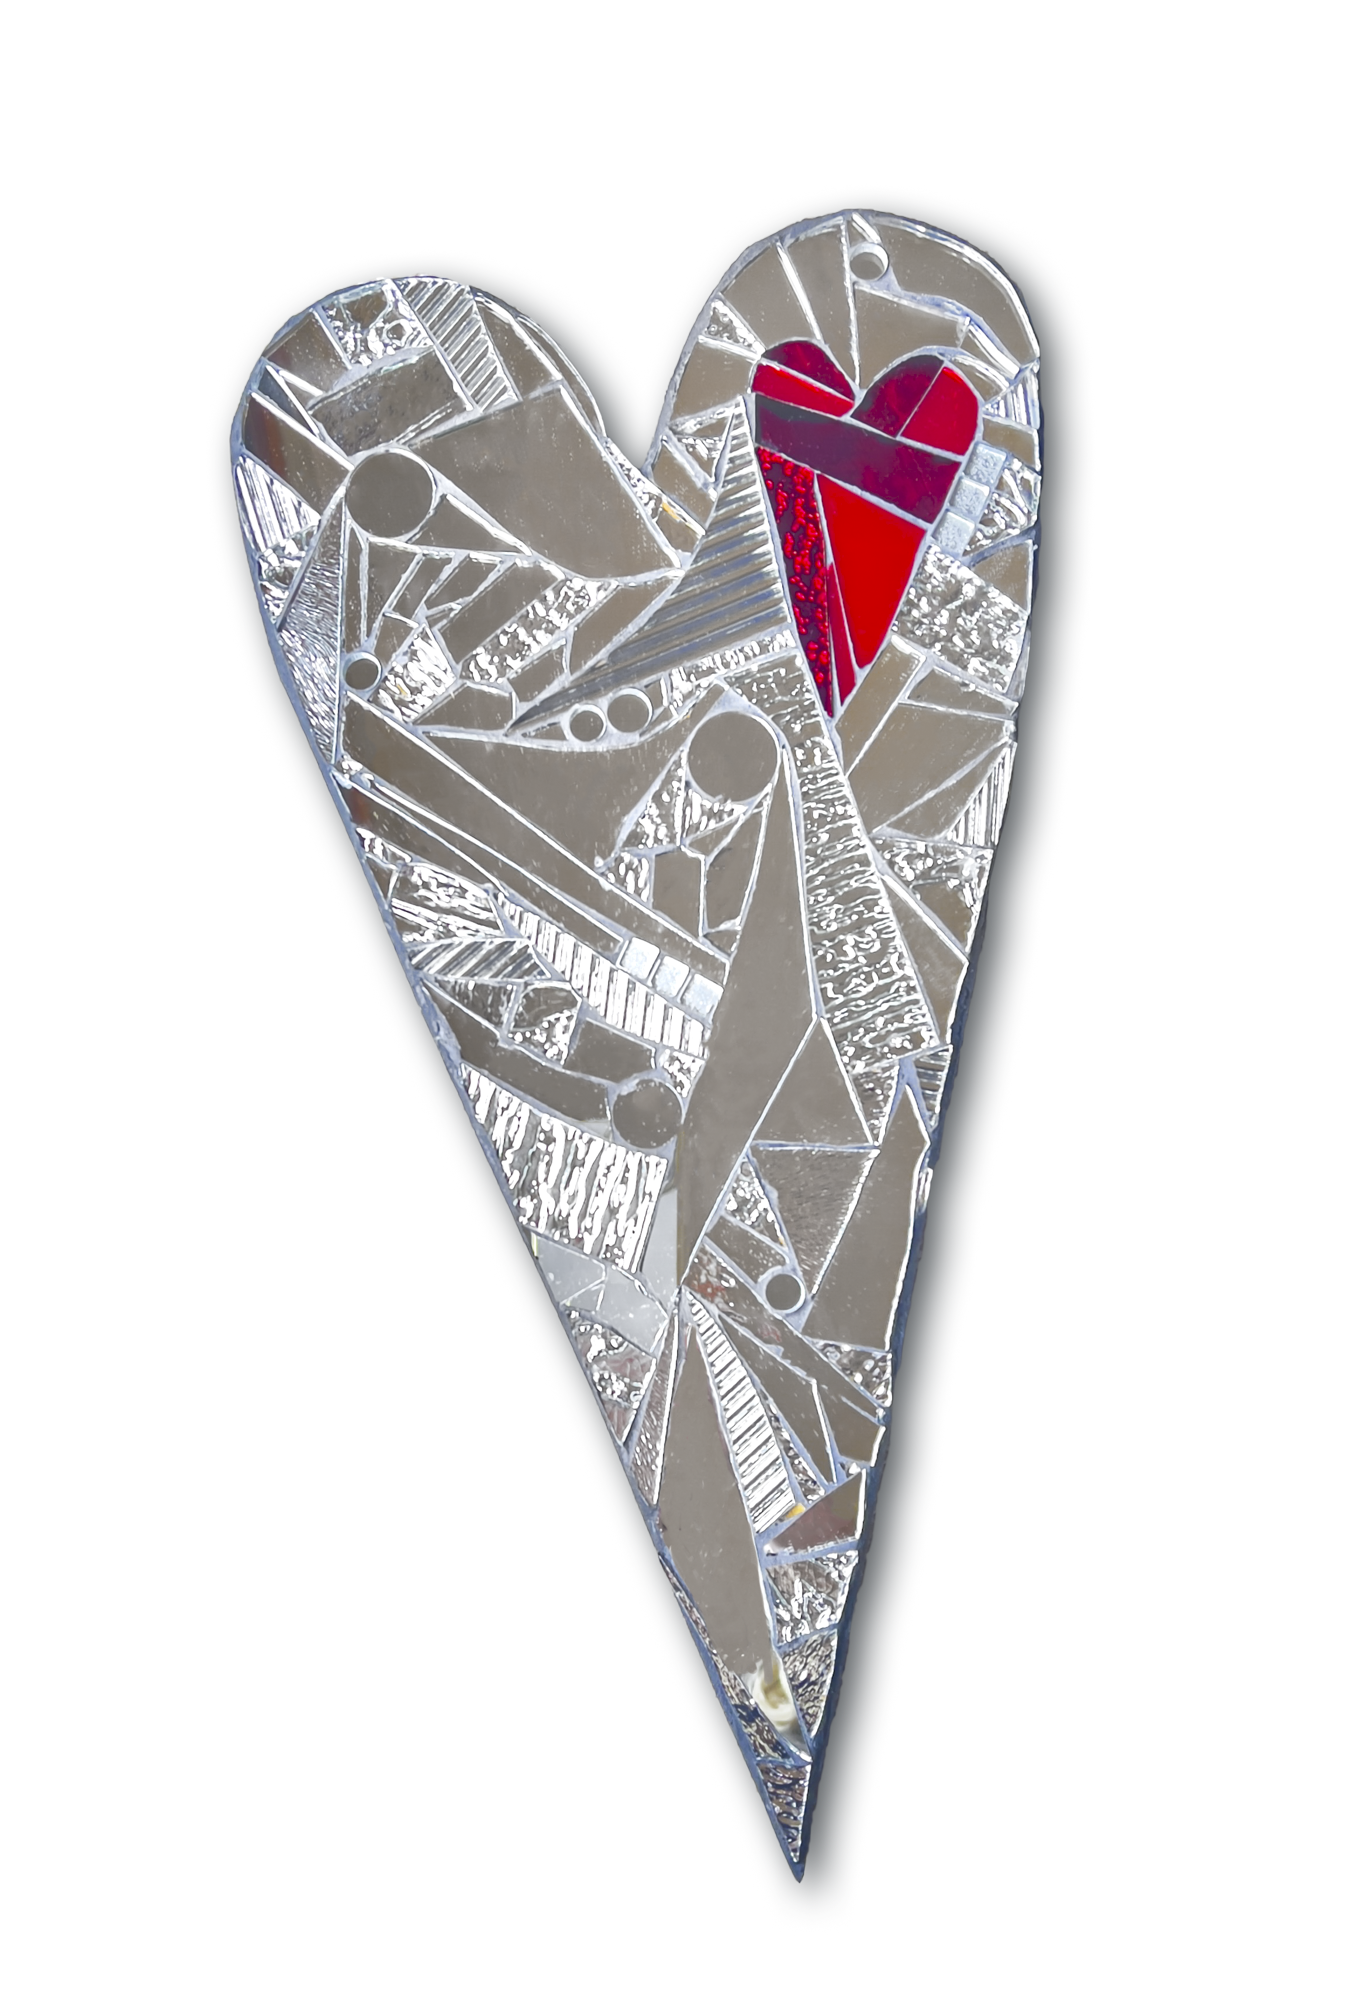 Heart-shaped mirrored-glass mosaic with small red mirror heart inset on a wood backing; 9"x18"; artist Denise Marshall